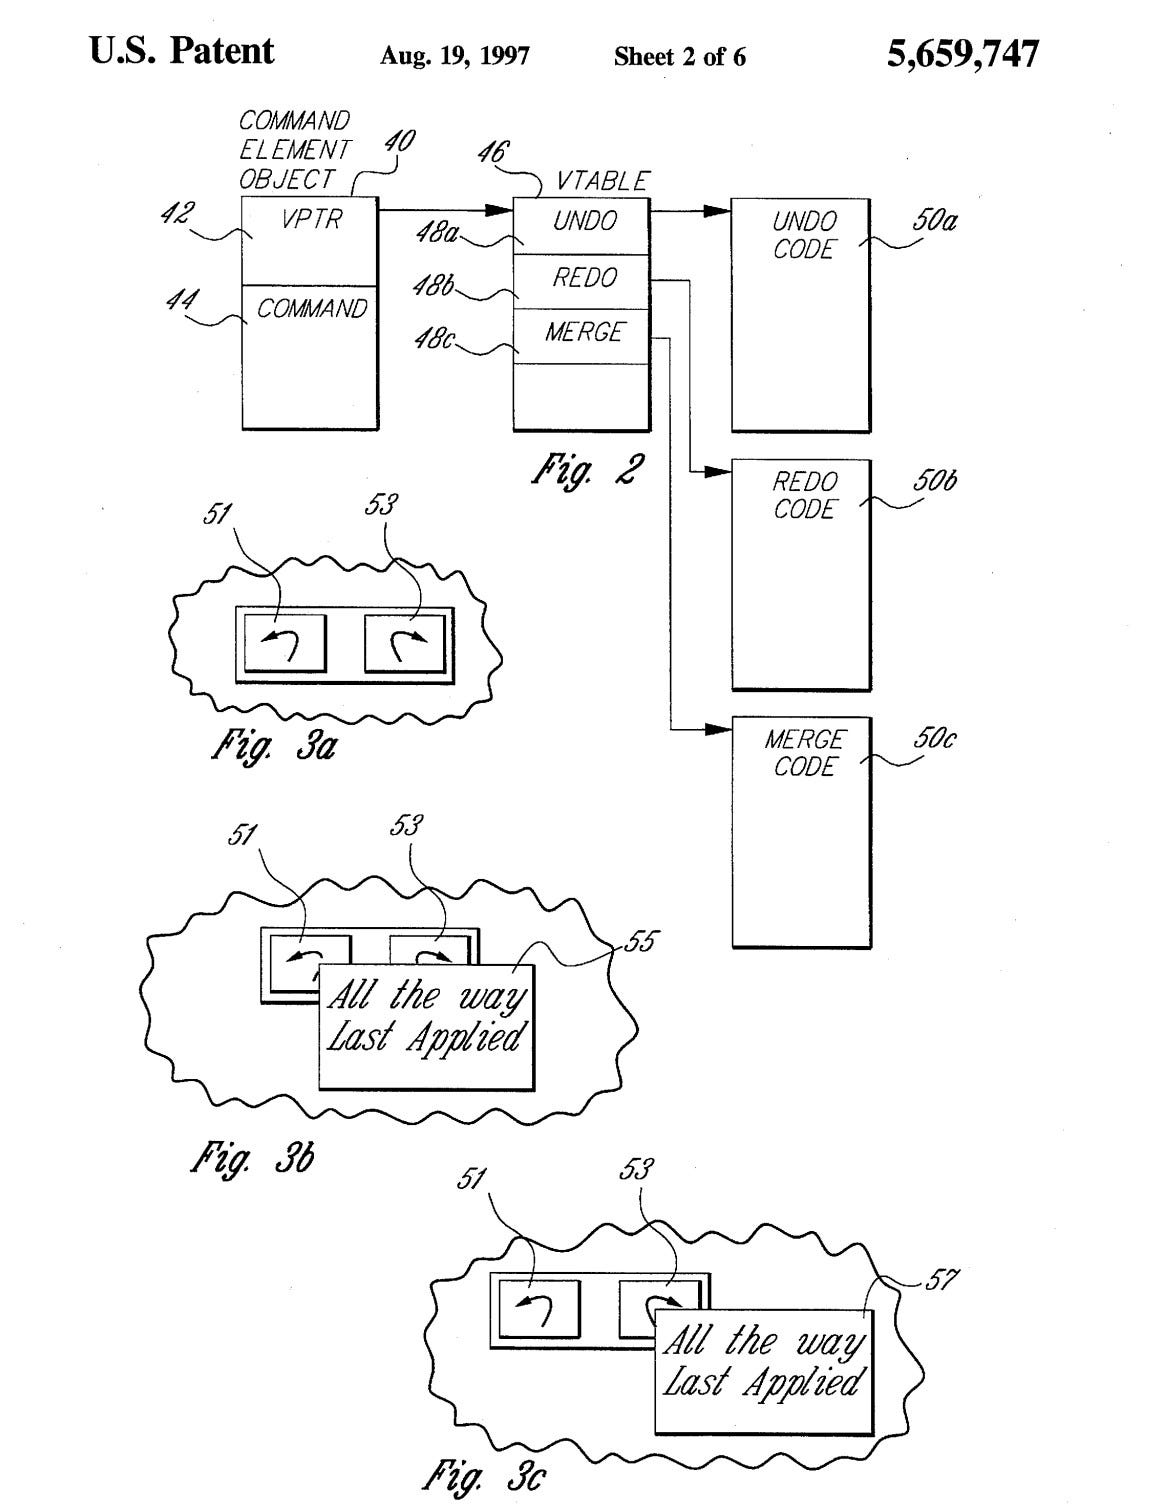 Patent application drawing of undo